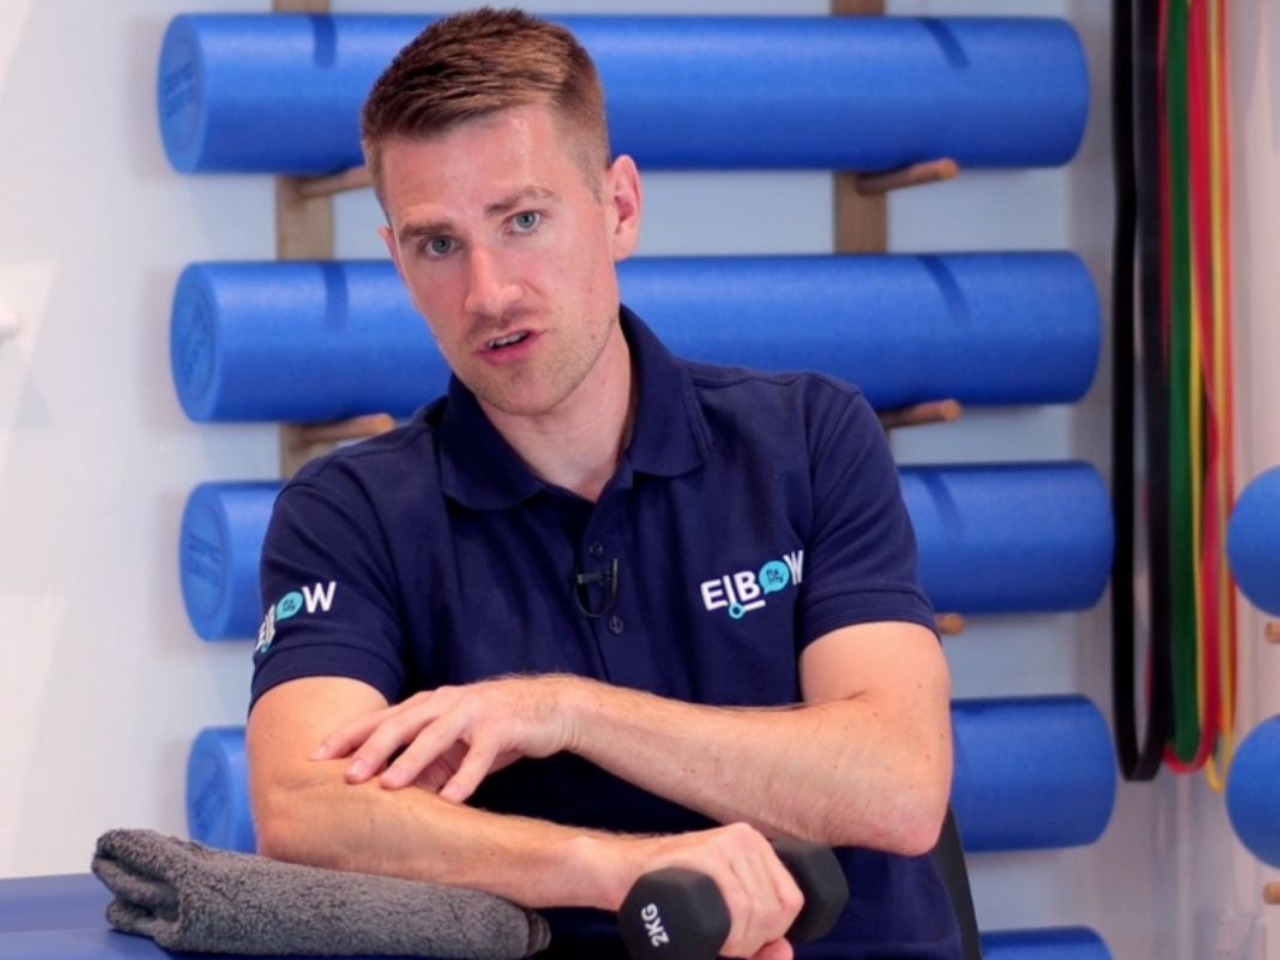 Fix My Elbow provides relief from elbow pain with proven strategies